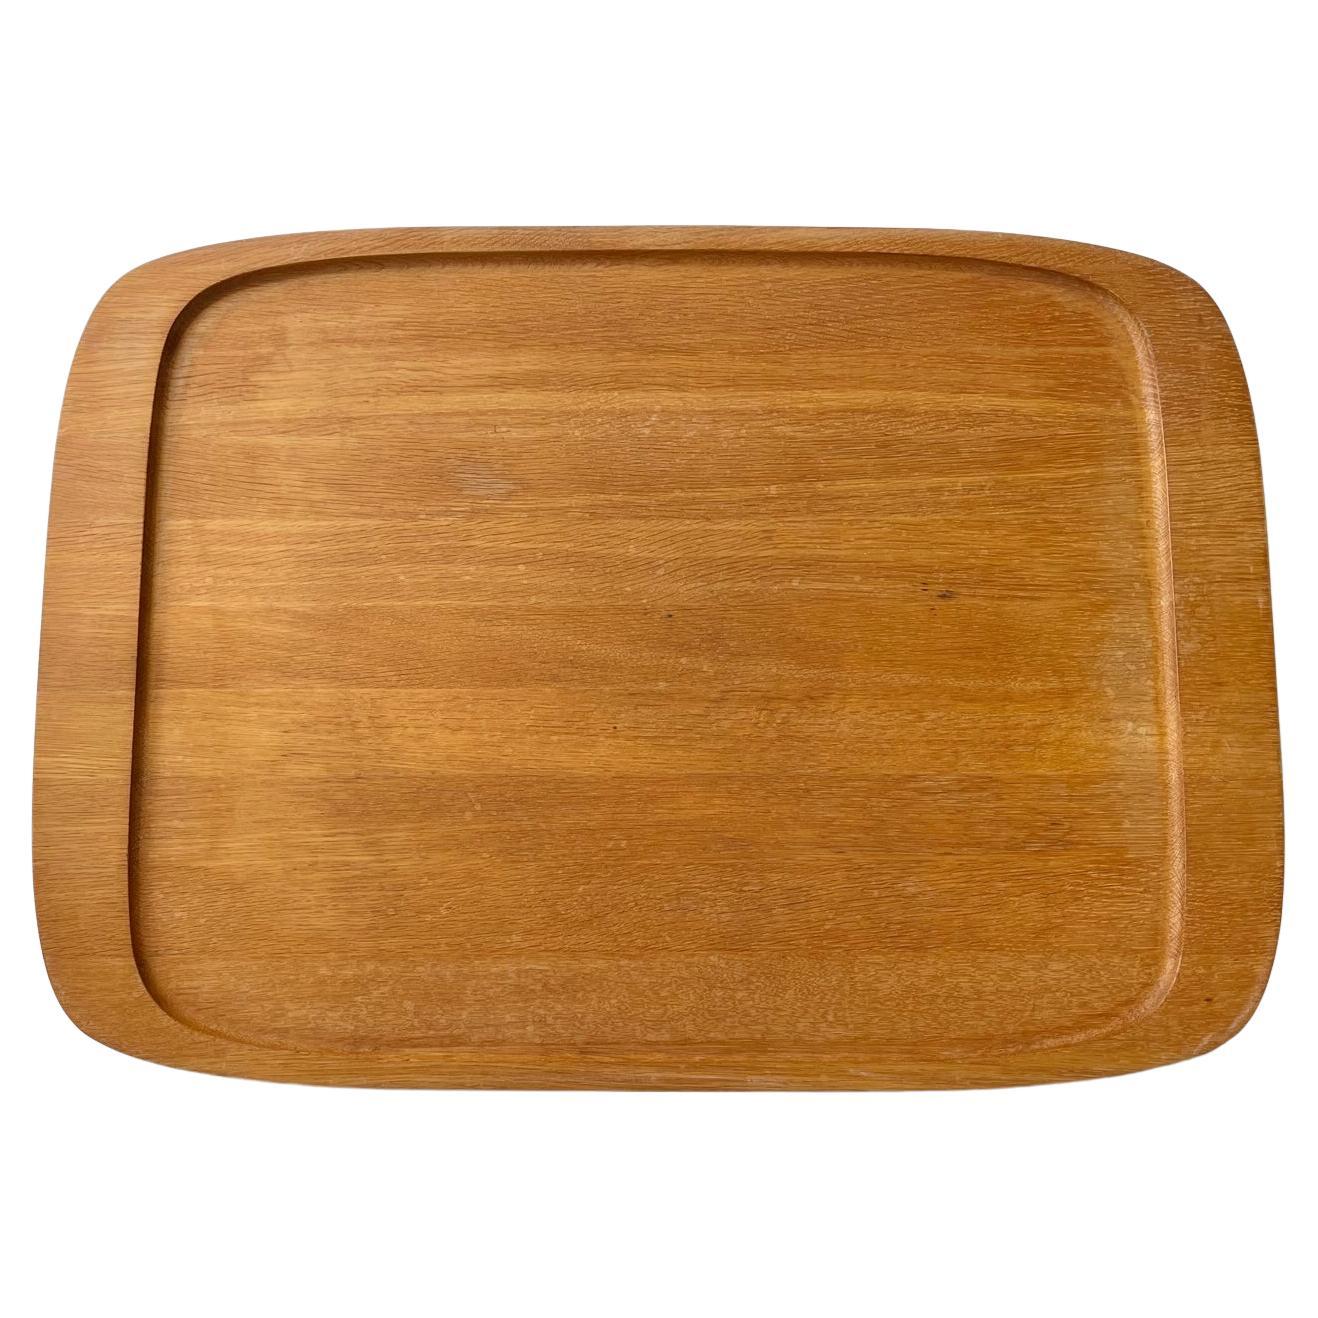 Danish Modern Large Serving Tray in Oak by Poul Hundevad, 1970s For Sale